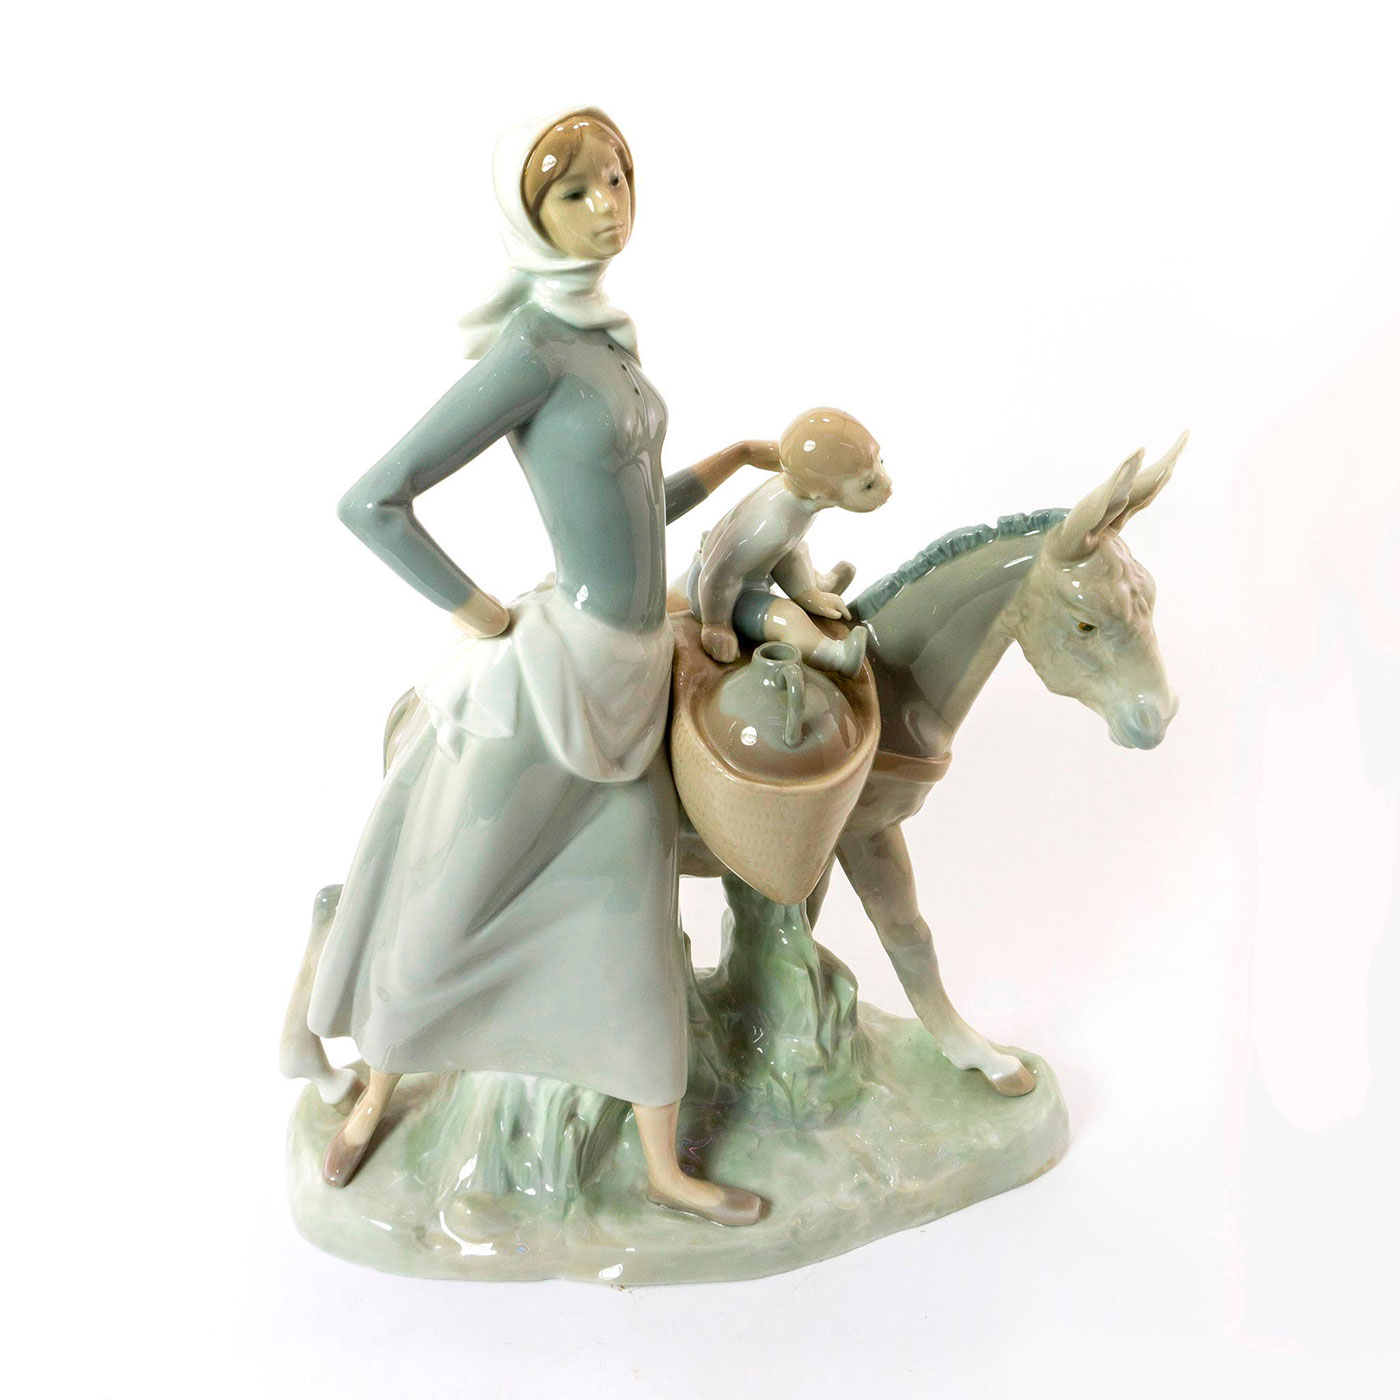 Woman with Girl & Donkey 1004666 - Lladro Porcelain Figurine 